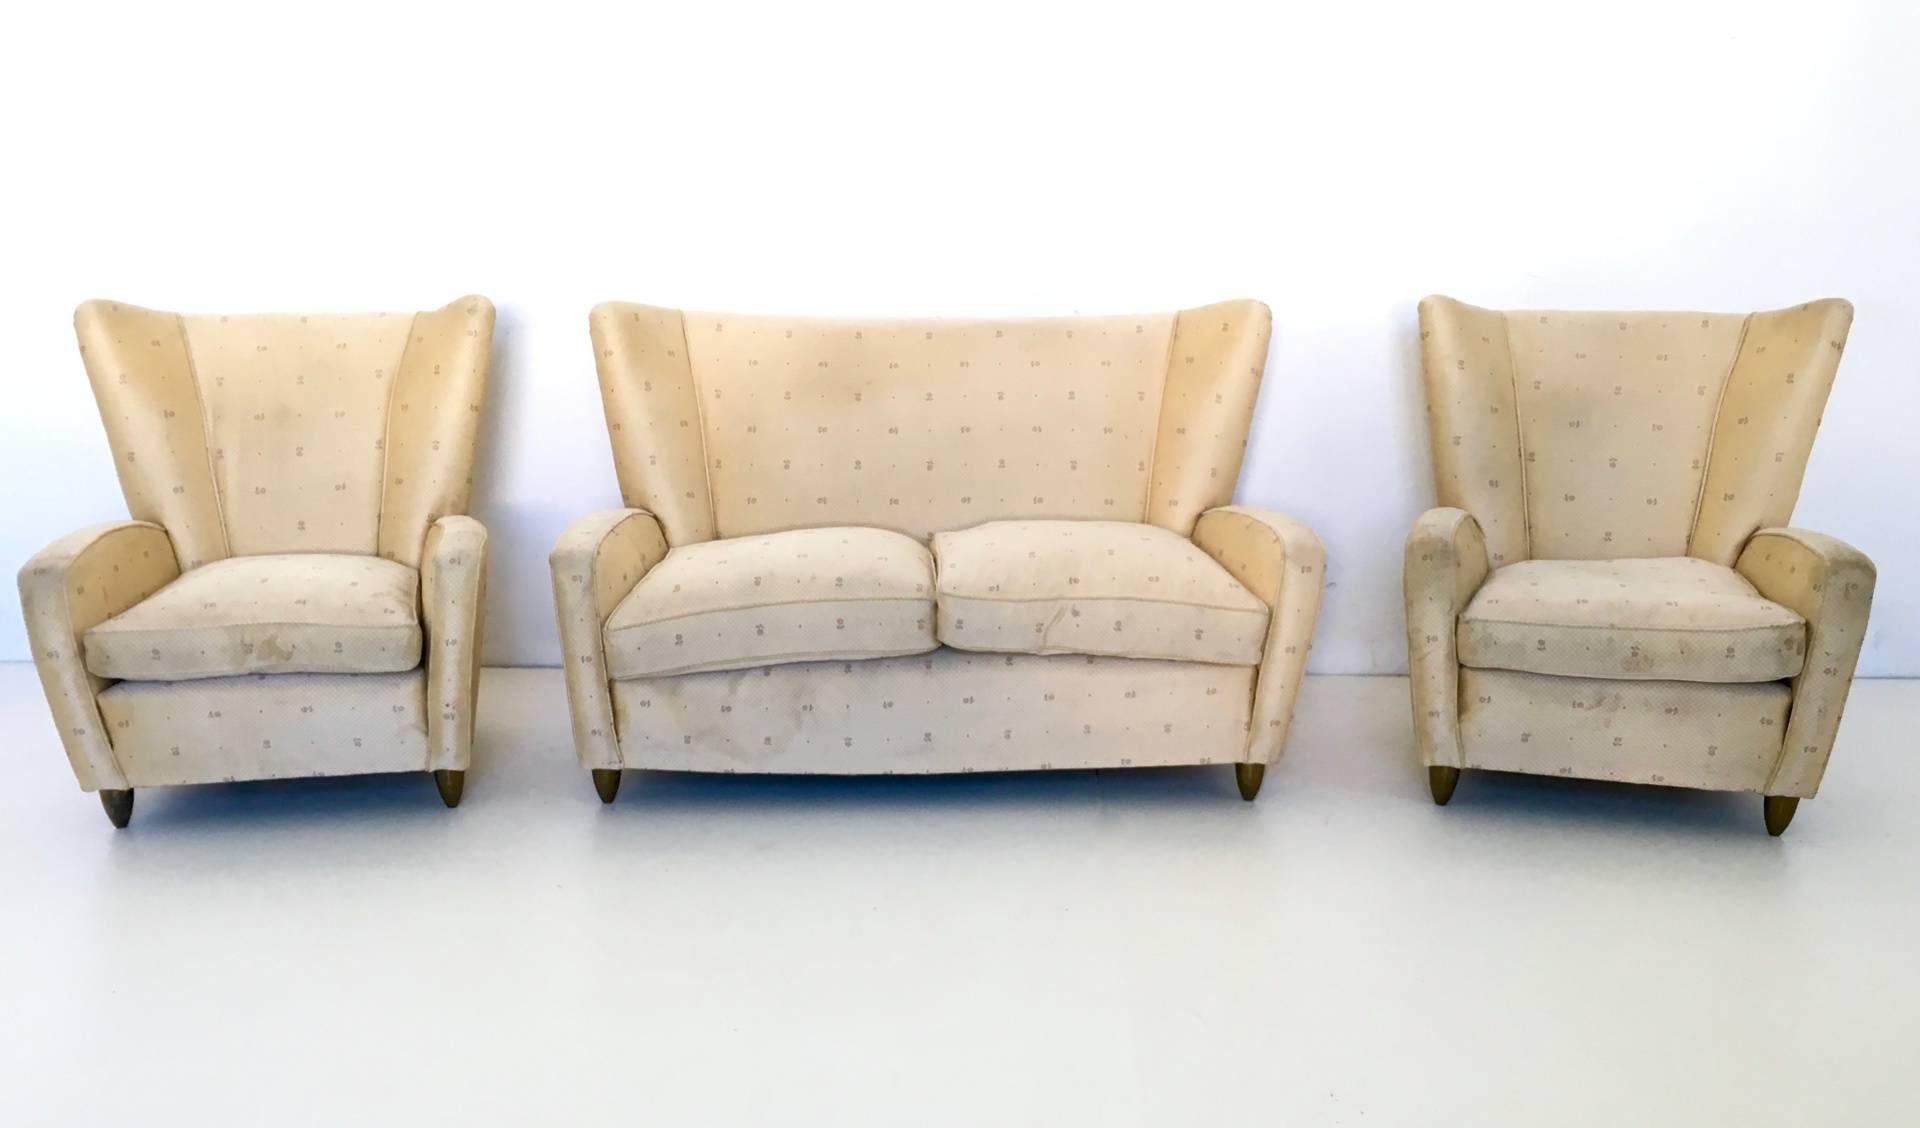 Made in Italy, 1950s.
This set is very particular and interesting because both the sofa and the armchairs feature vintage brass cones feet.
Their fabric is original and, as you can see, they need to be reupholstered.
It is a vintage set, therefore